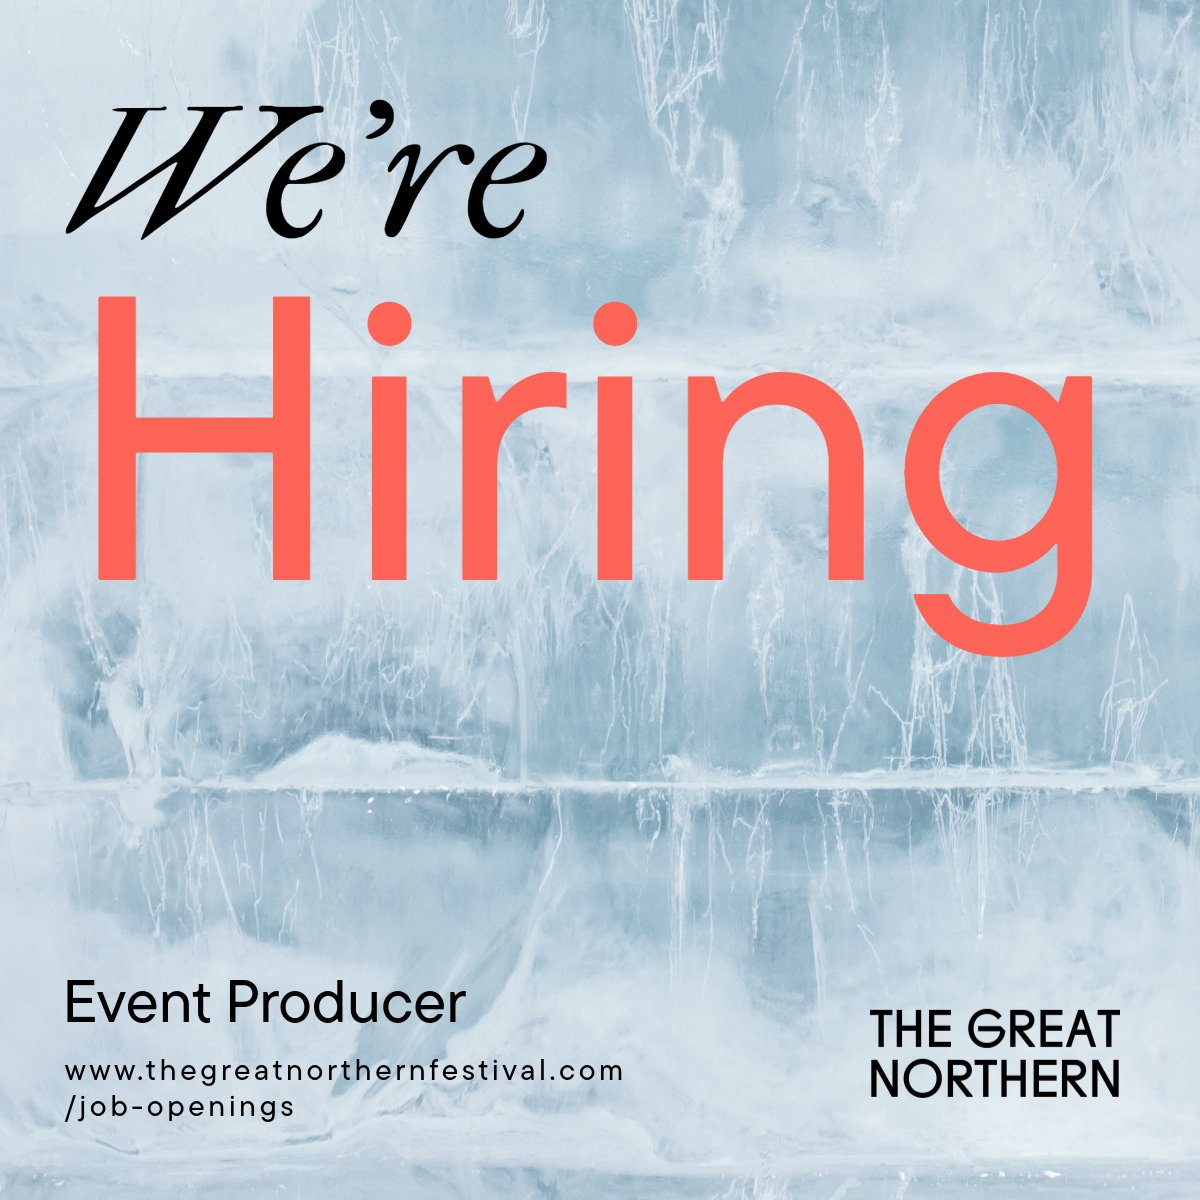 The Great Northern is seeking an experienced, innovative, and flexible event producer to help organize an exciting installation during its 2024 festival! Find details + apply by Oct 8 for priority review at thegreatnorthernfestival.com/job-openings.